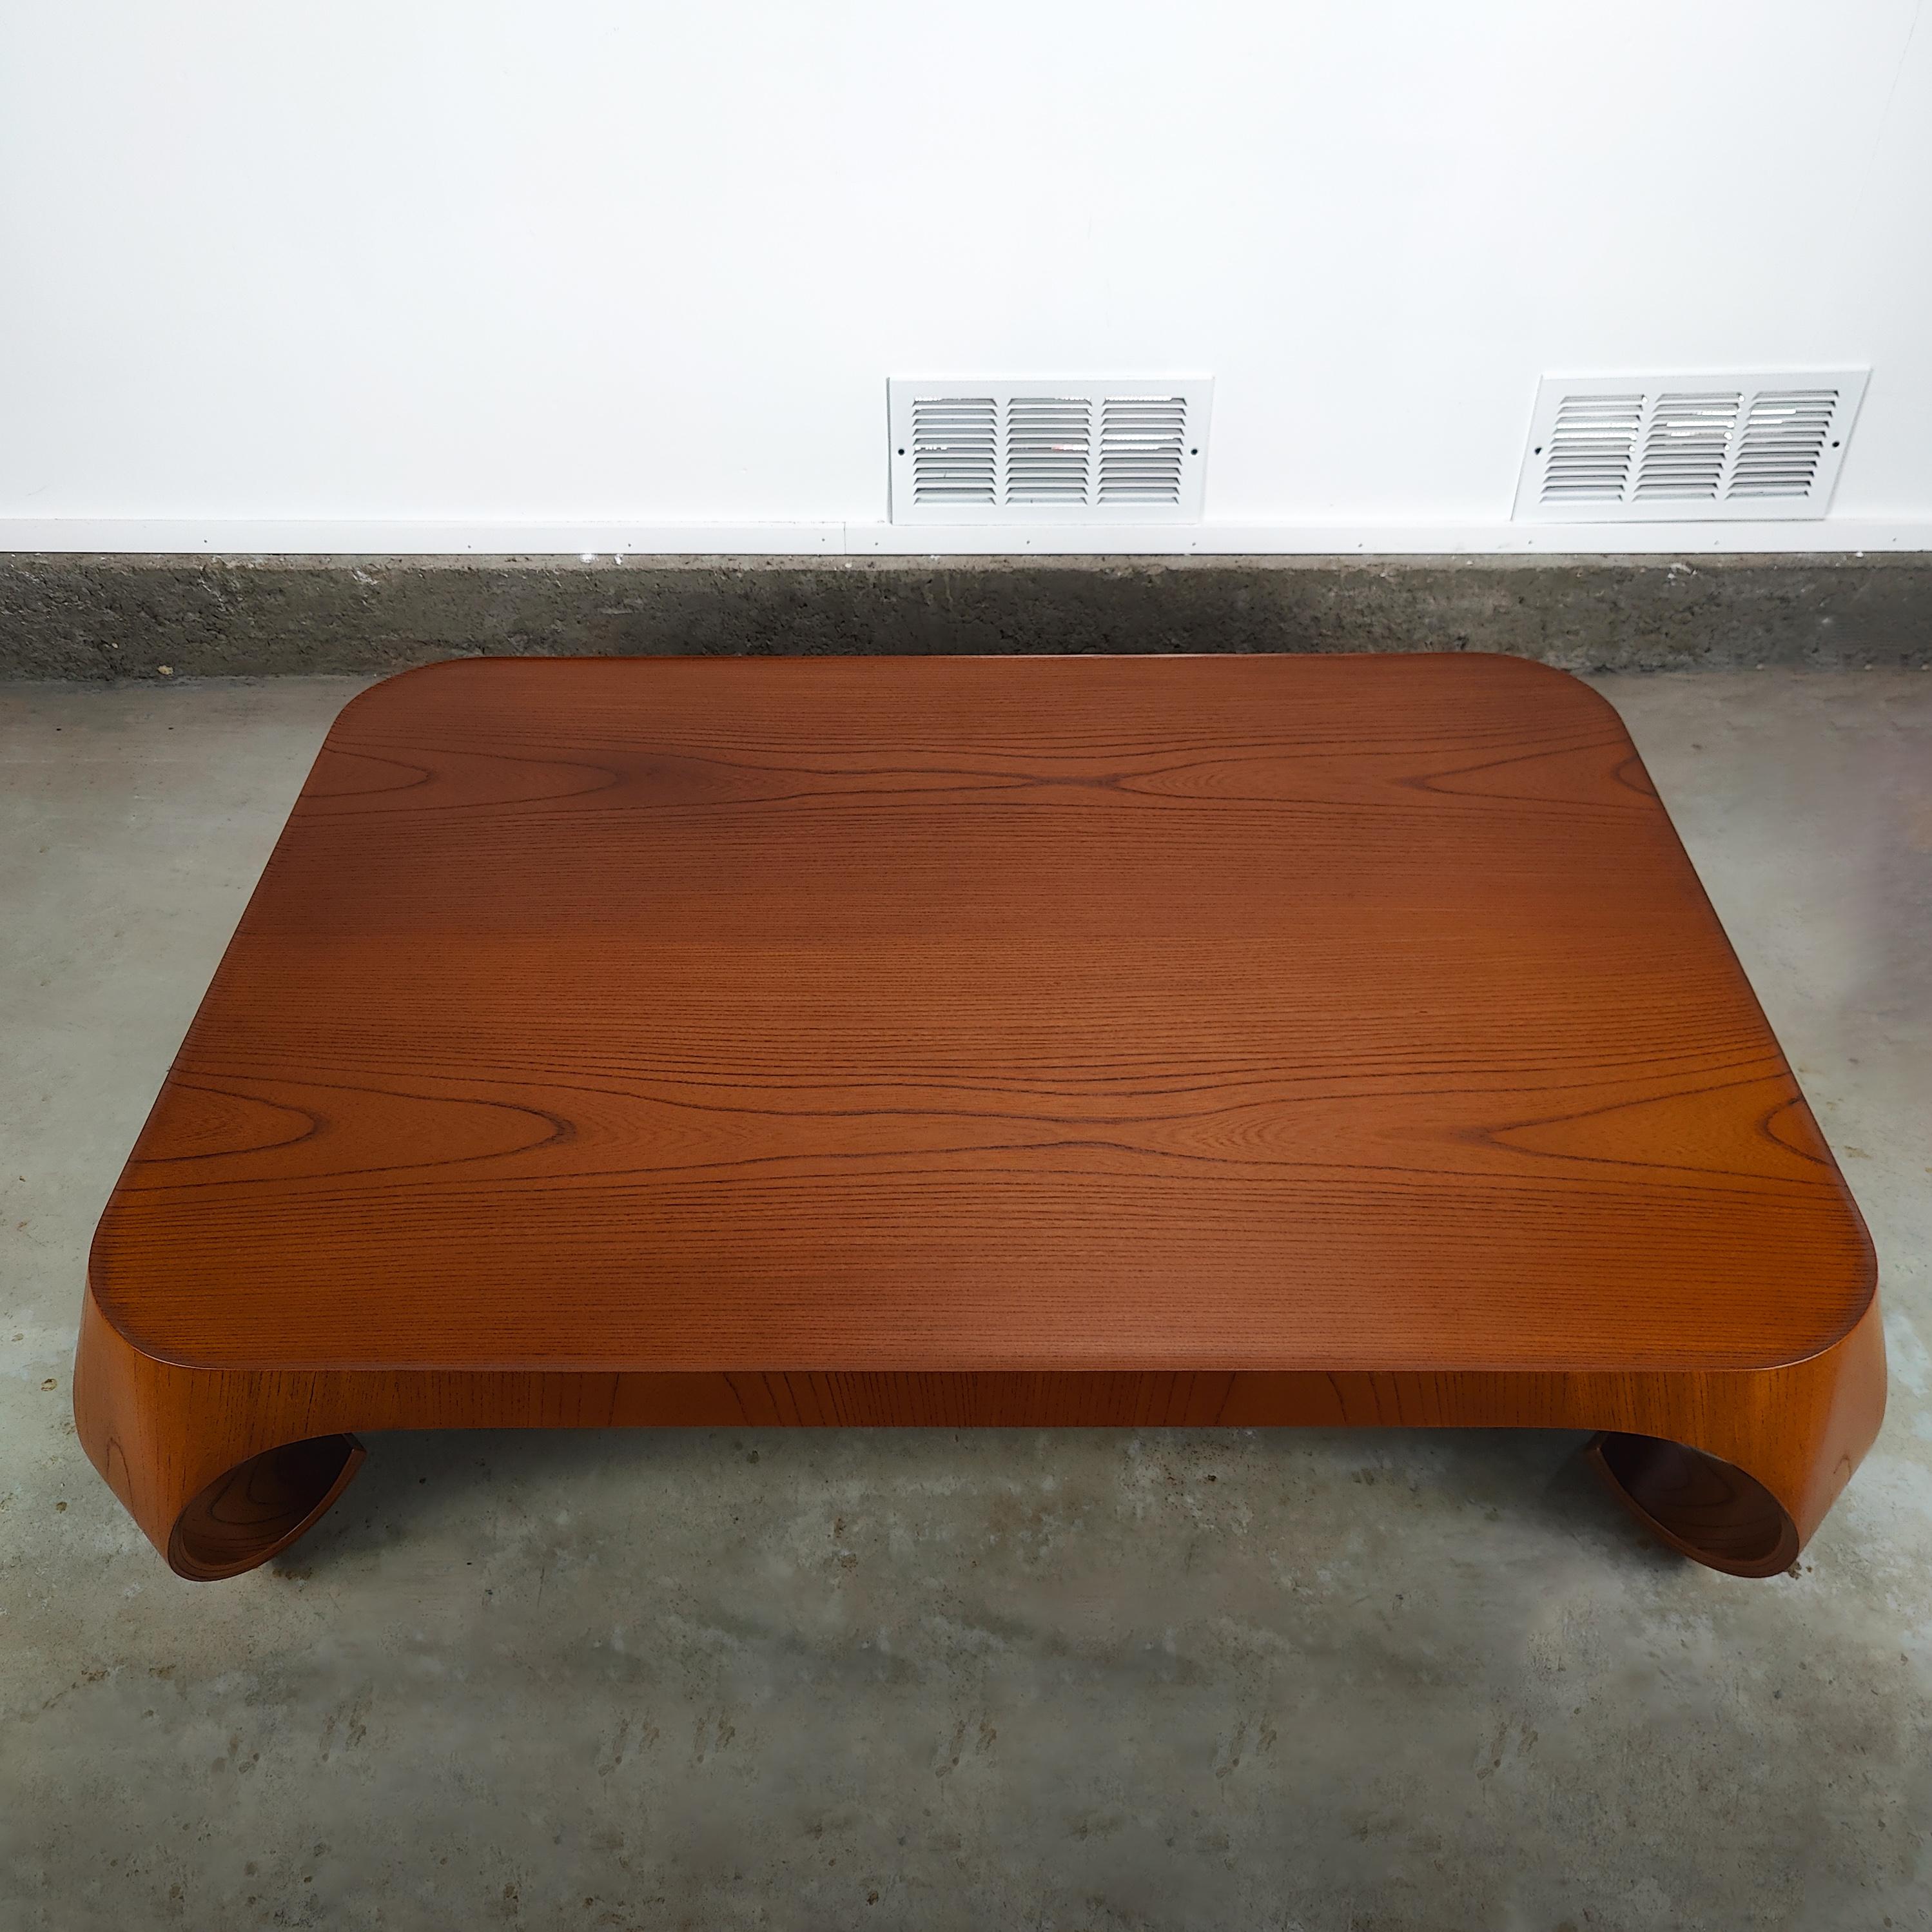 Mid-20th Century Japanese Modern Coffee Table By Isamu Kenmochi for Tendo Mokko For Sale